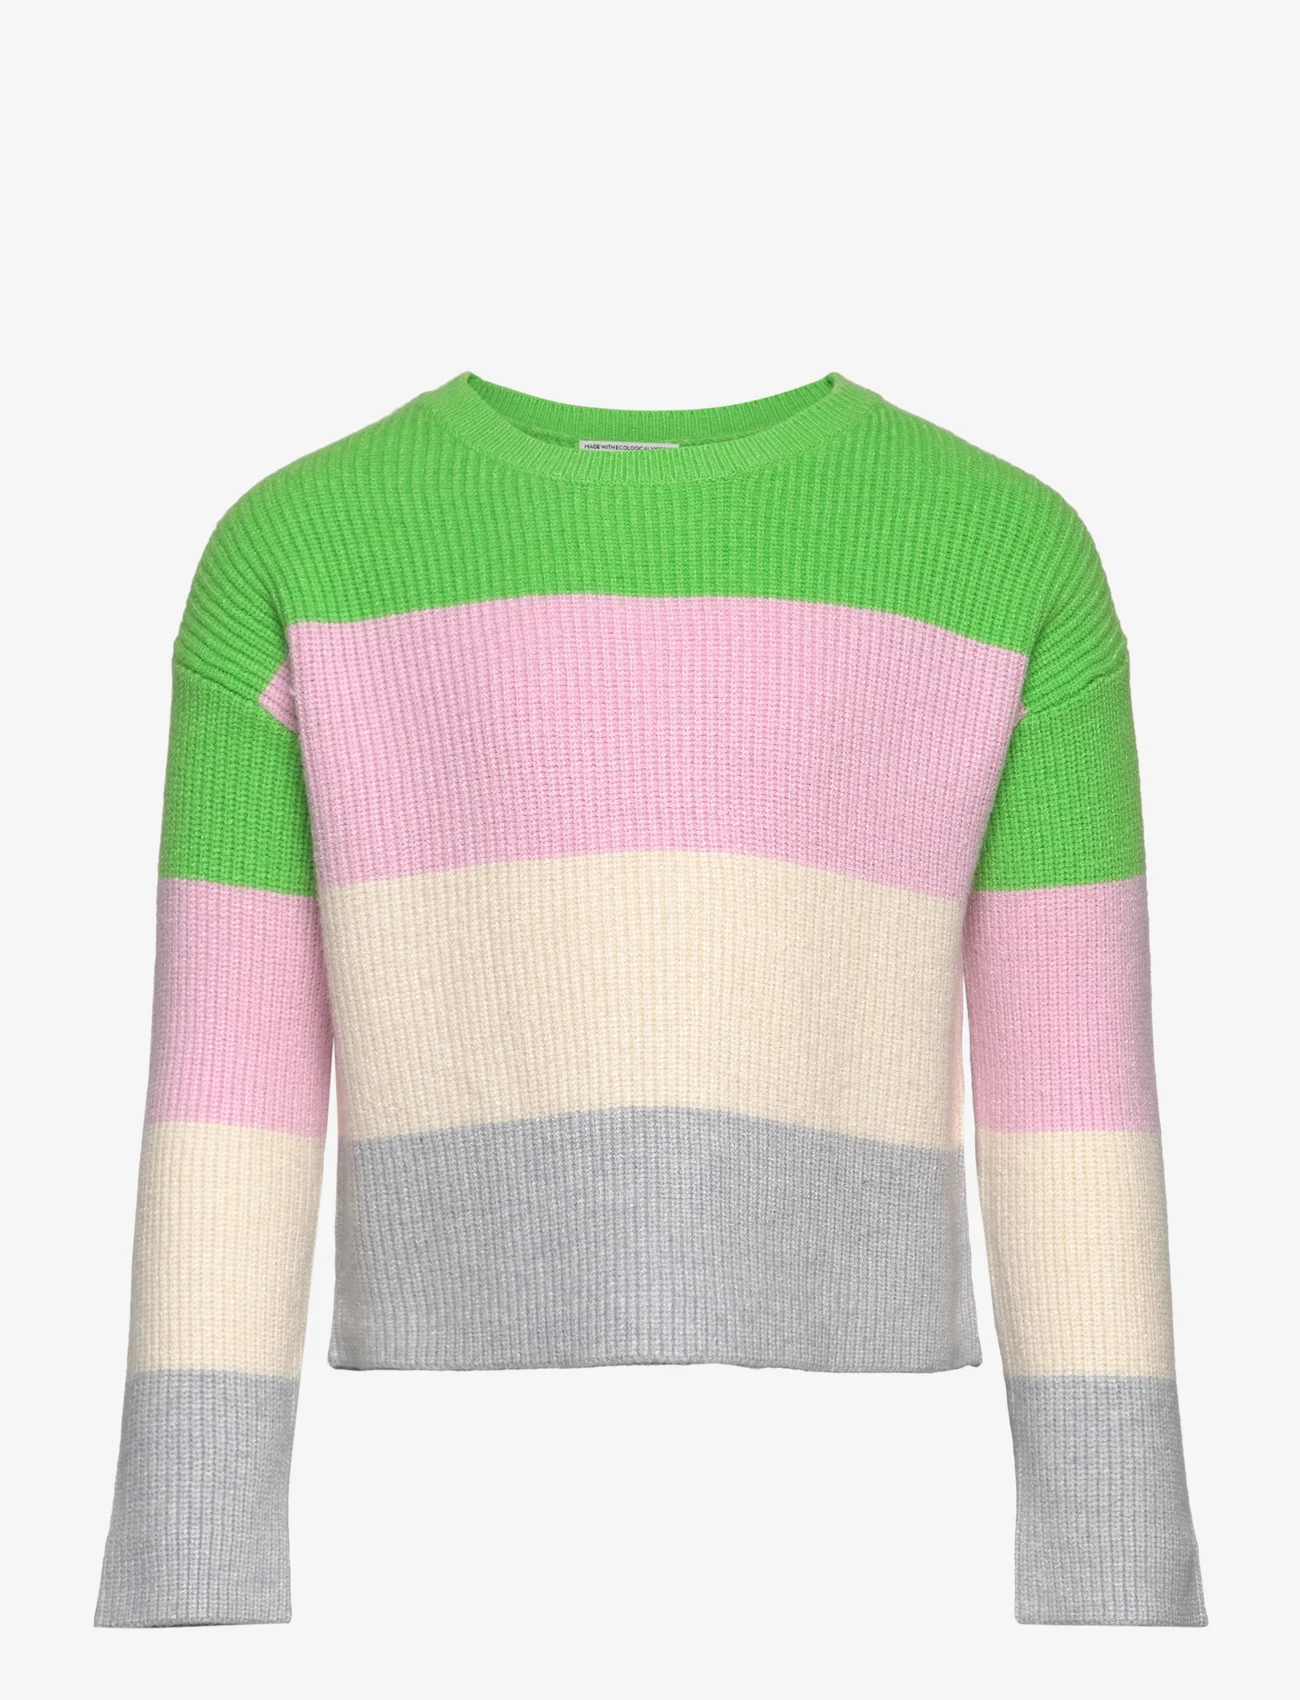 Tom Tailor - striped sweater - jumpers - green pink multicolor stripe - 0